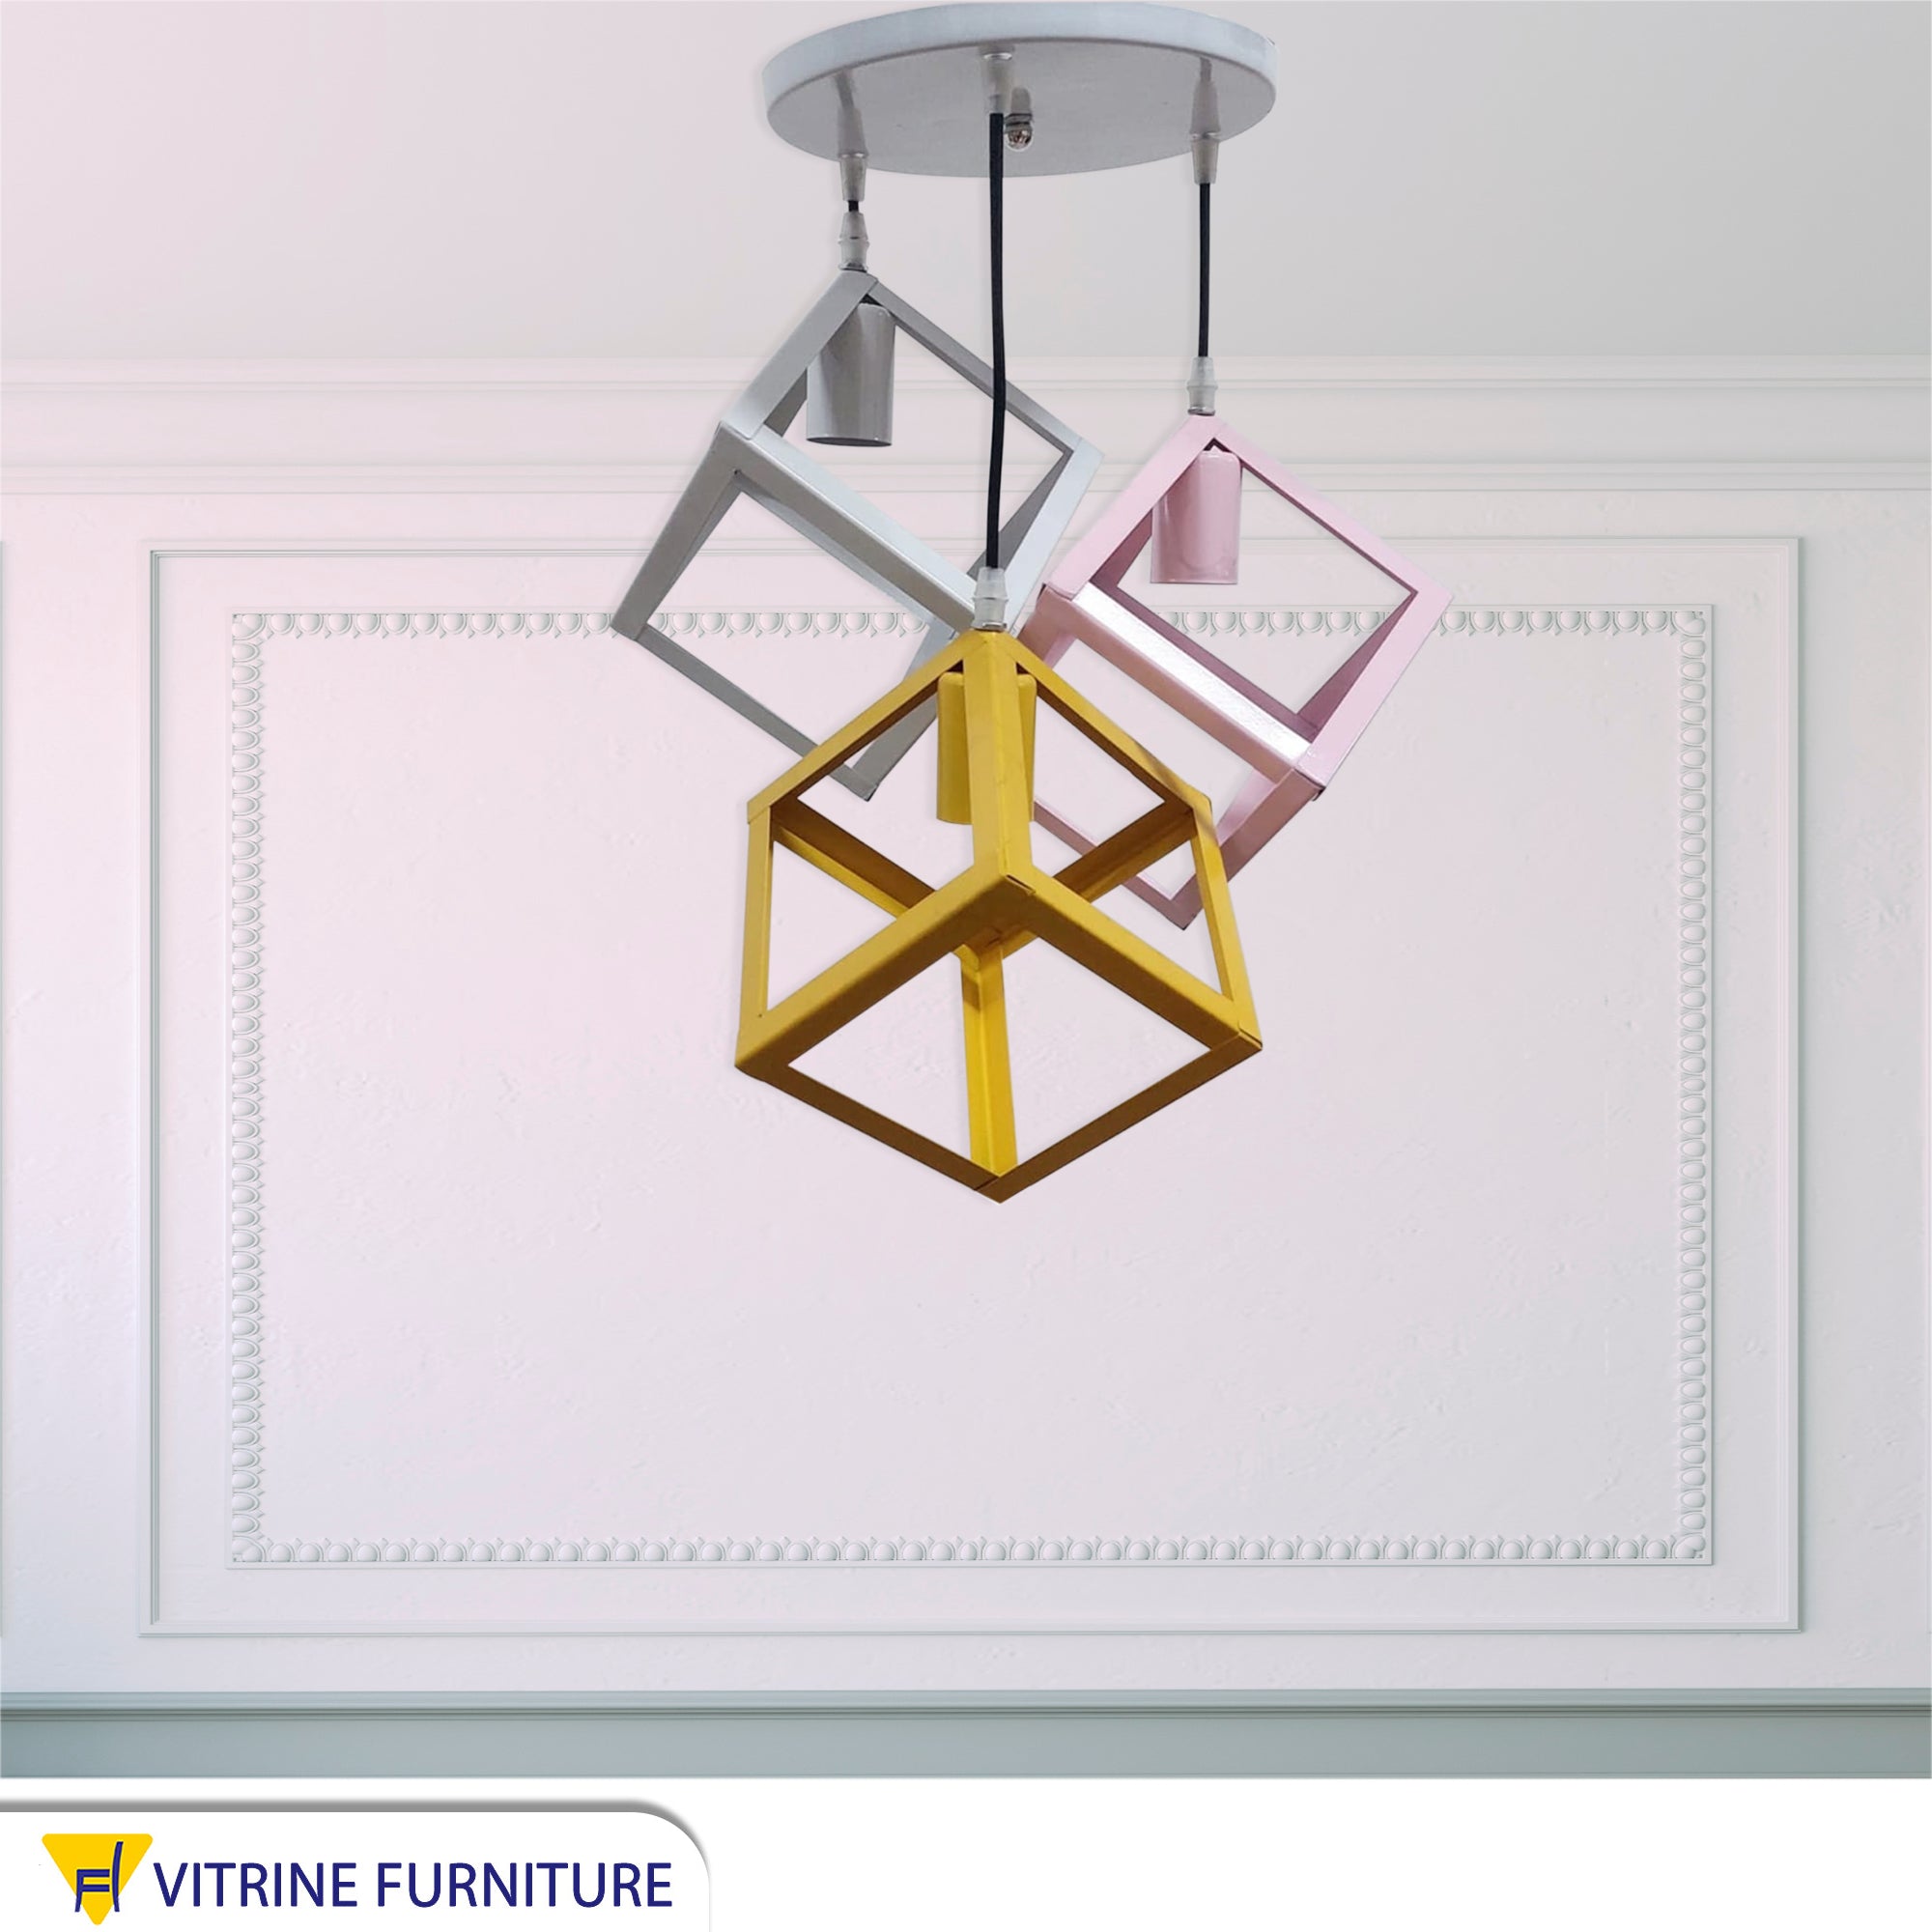 Cubic ceiling chandelier in different colors